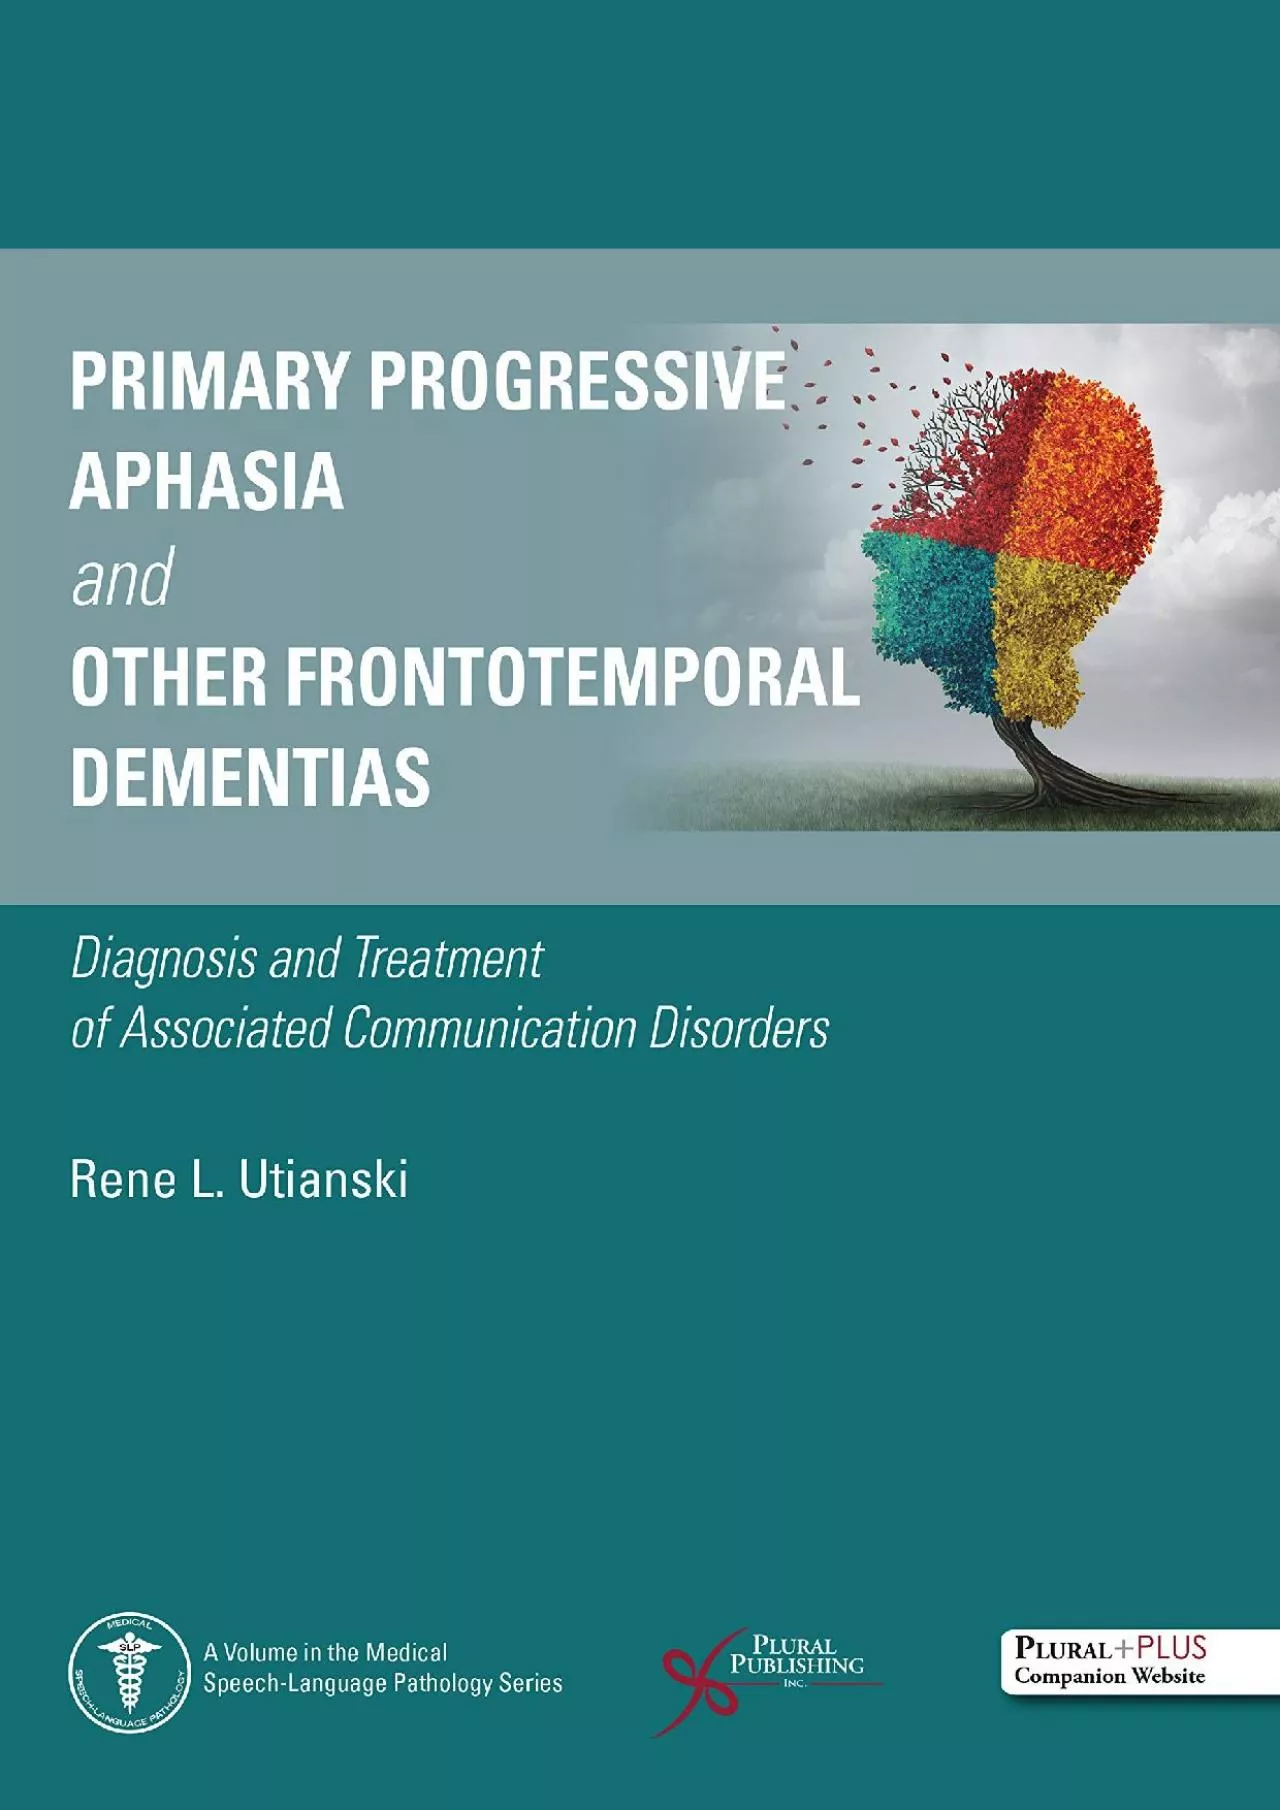 (DOWNLOAD)-Primary Progressive Aphasia and Other Frontotemporal Dementias: Diagnosis and